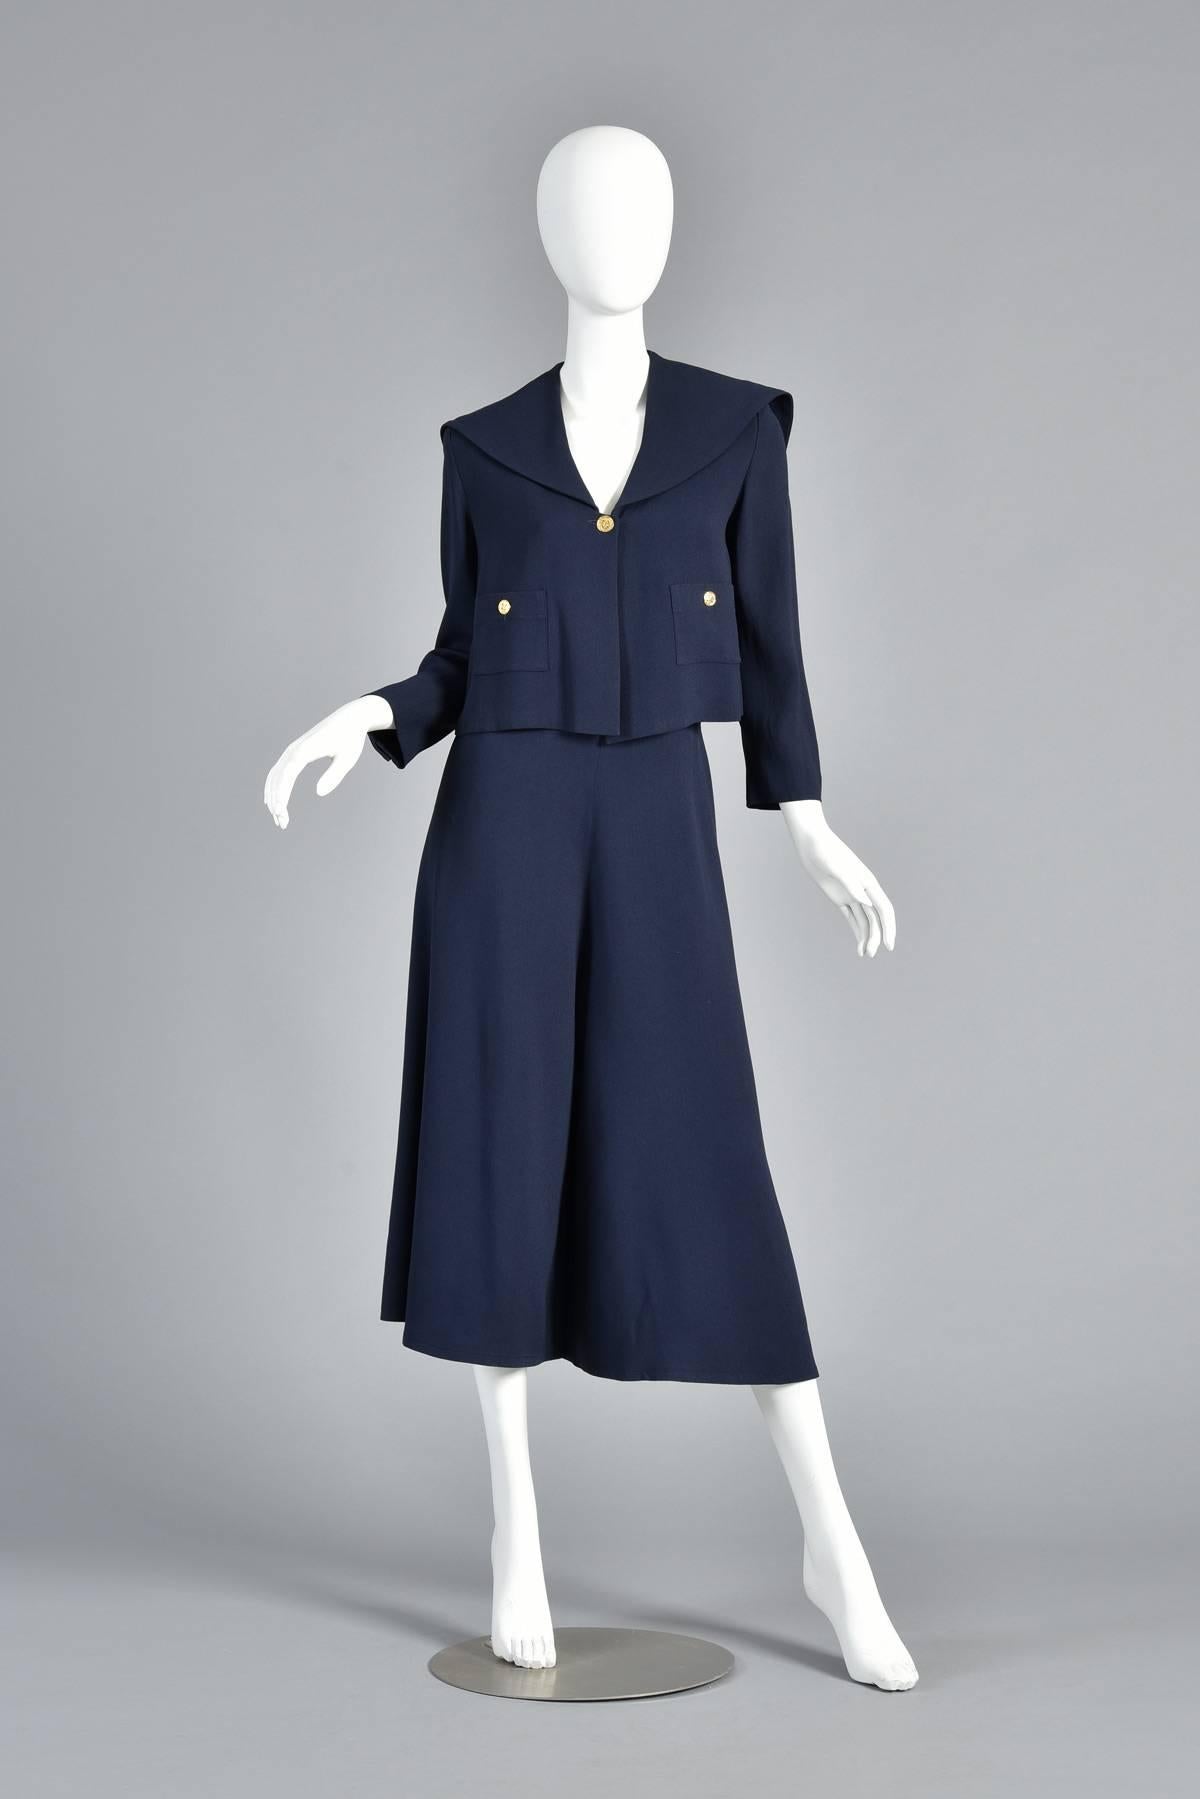 Vintage 1990s sailor style gaucho pant suit by Sonia Rykiel. Jacket features draped sailor shawl style collar with caped back. Boxy, swing cut with dual pockets. Gold tone faux-button buttons. Matching super wide legged gaucho pants! Excellent